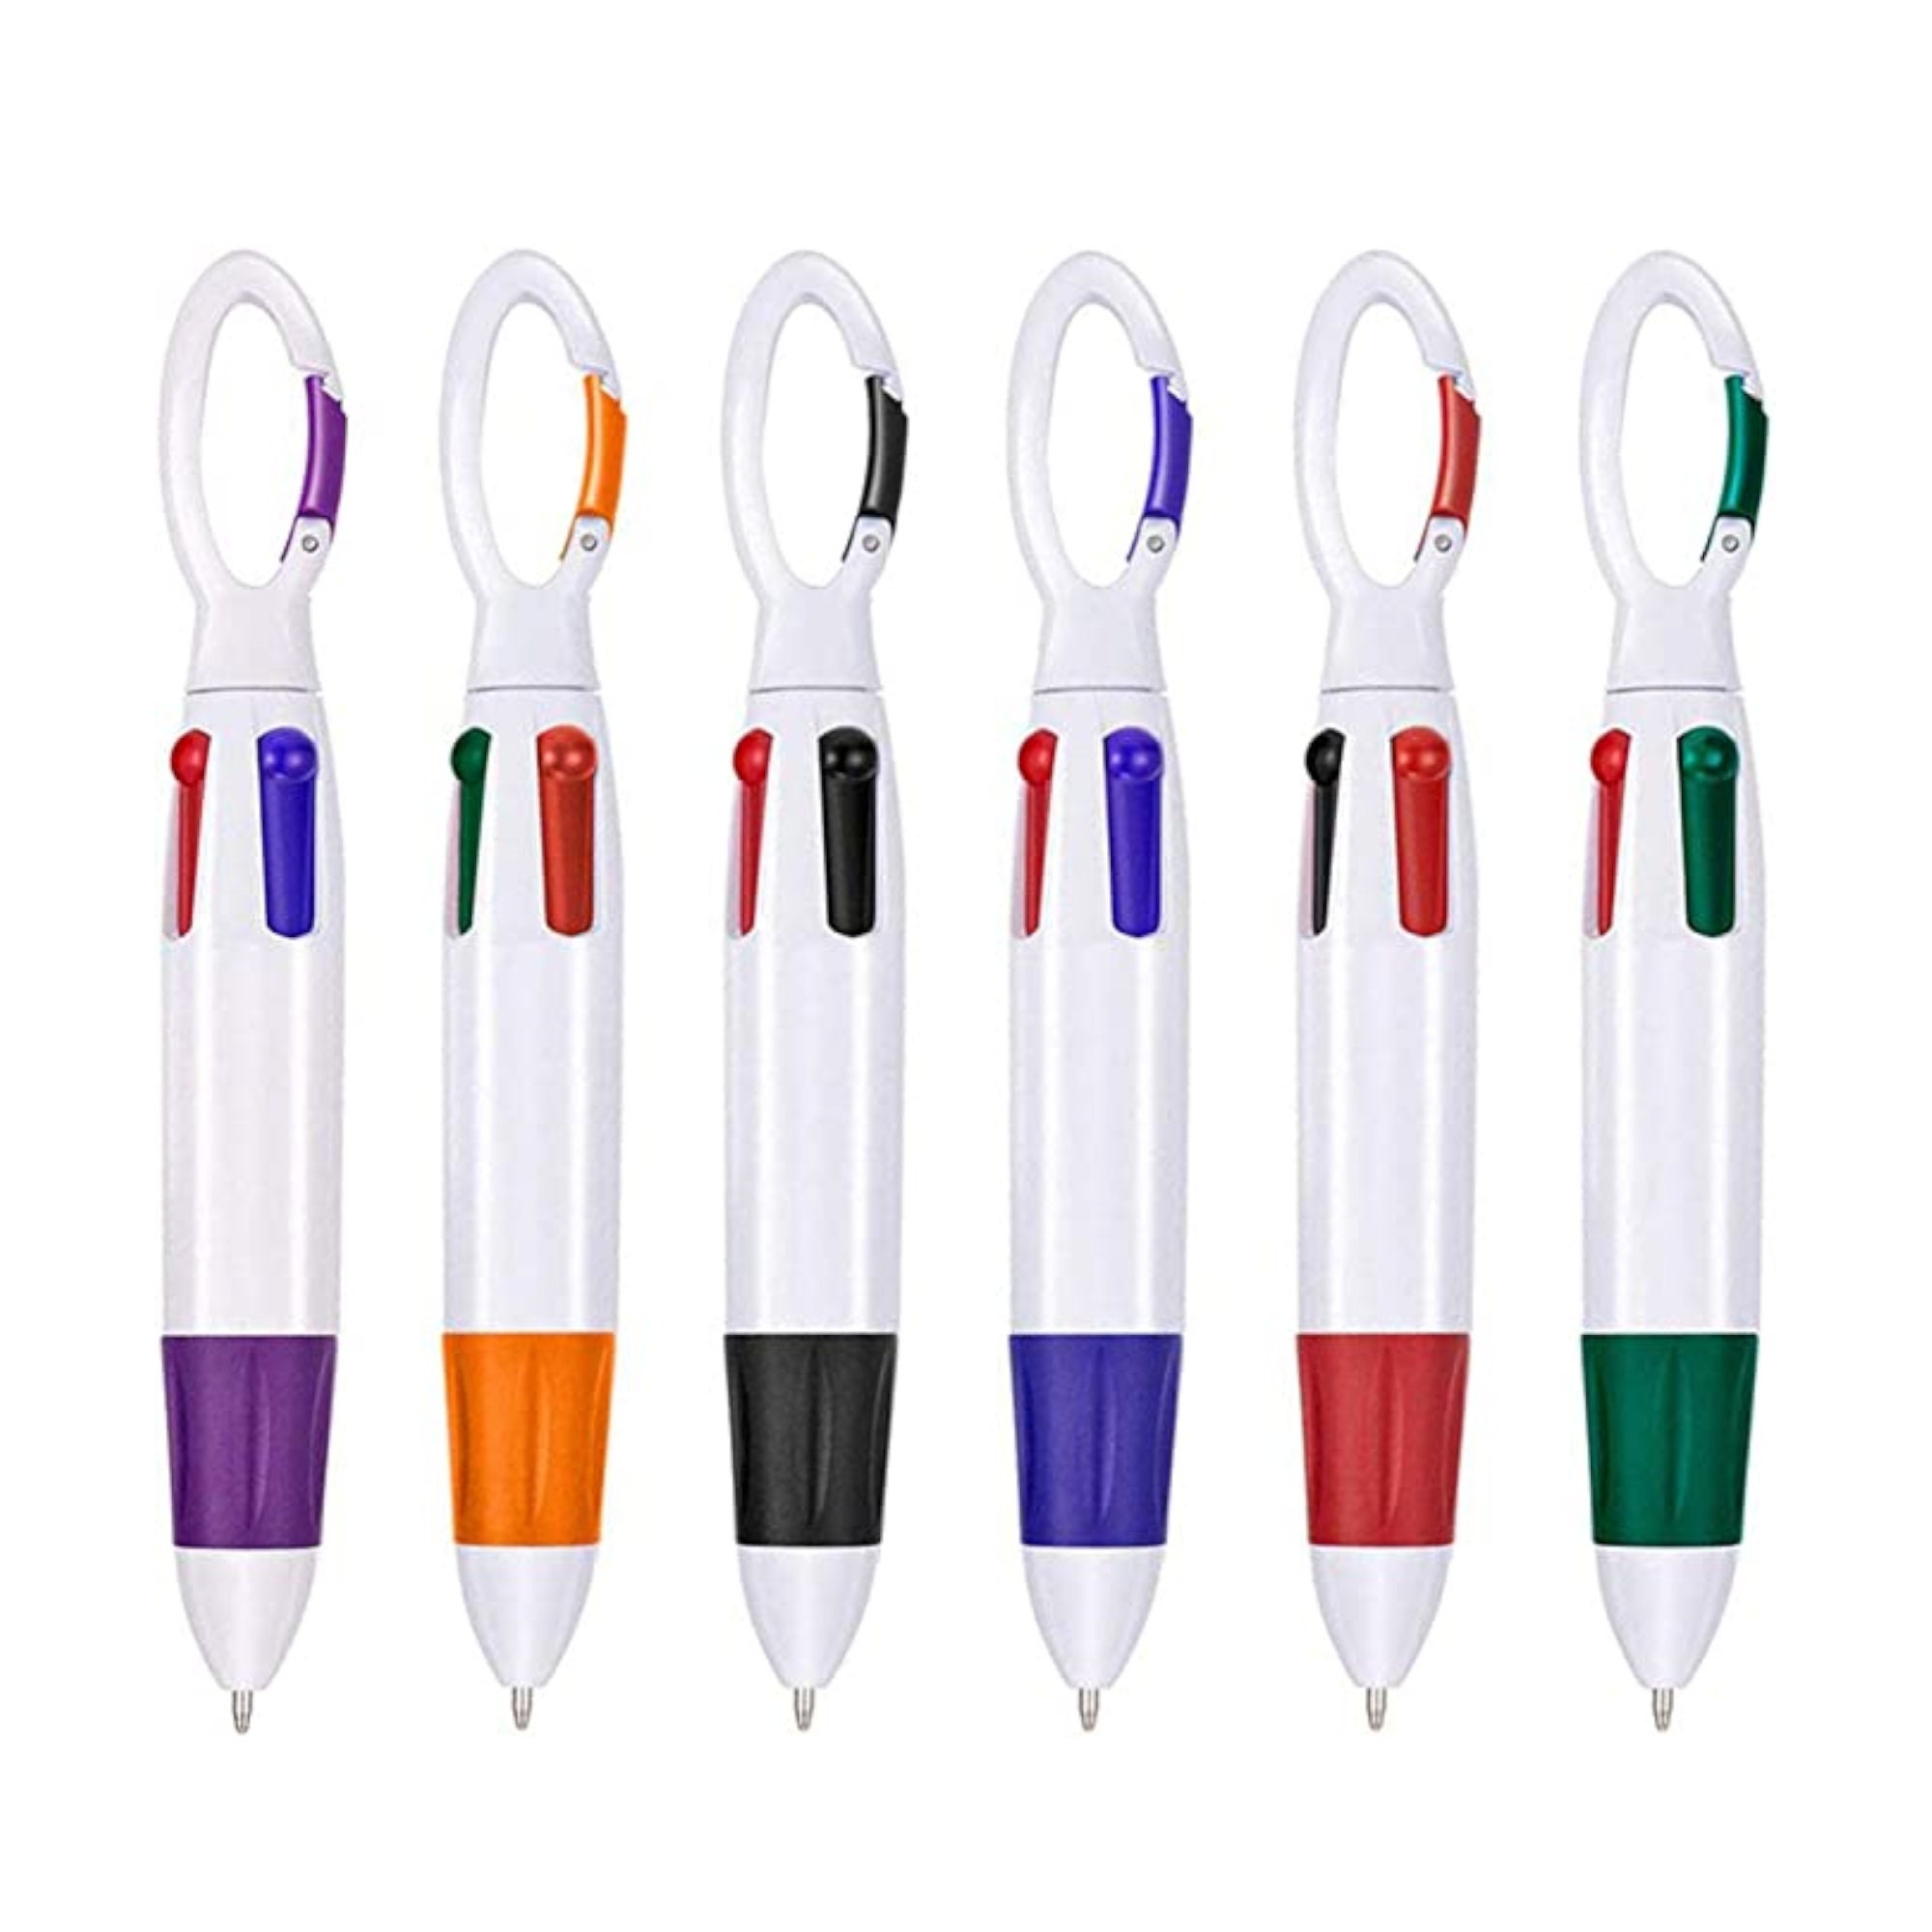 Asxma New Model Wooden Calligraphy Pen Set, which Includes The Pen Nib As Well As Four Different Ink Colors. Suitable for Use by All Ages, and Experie